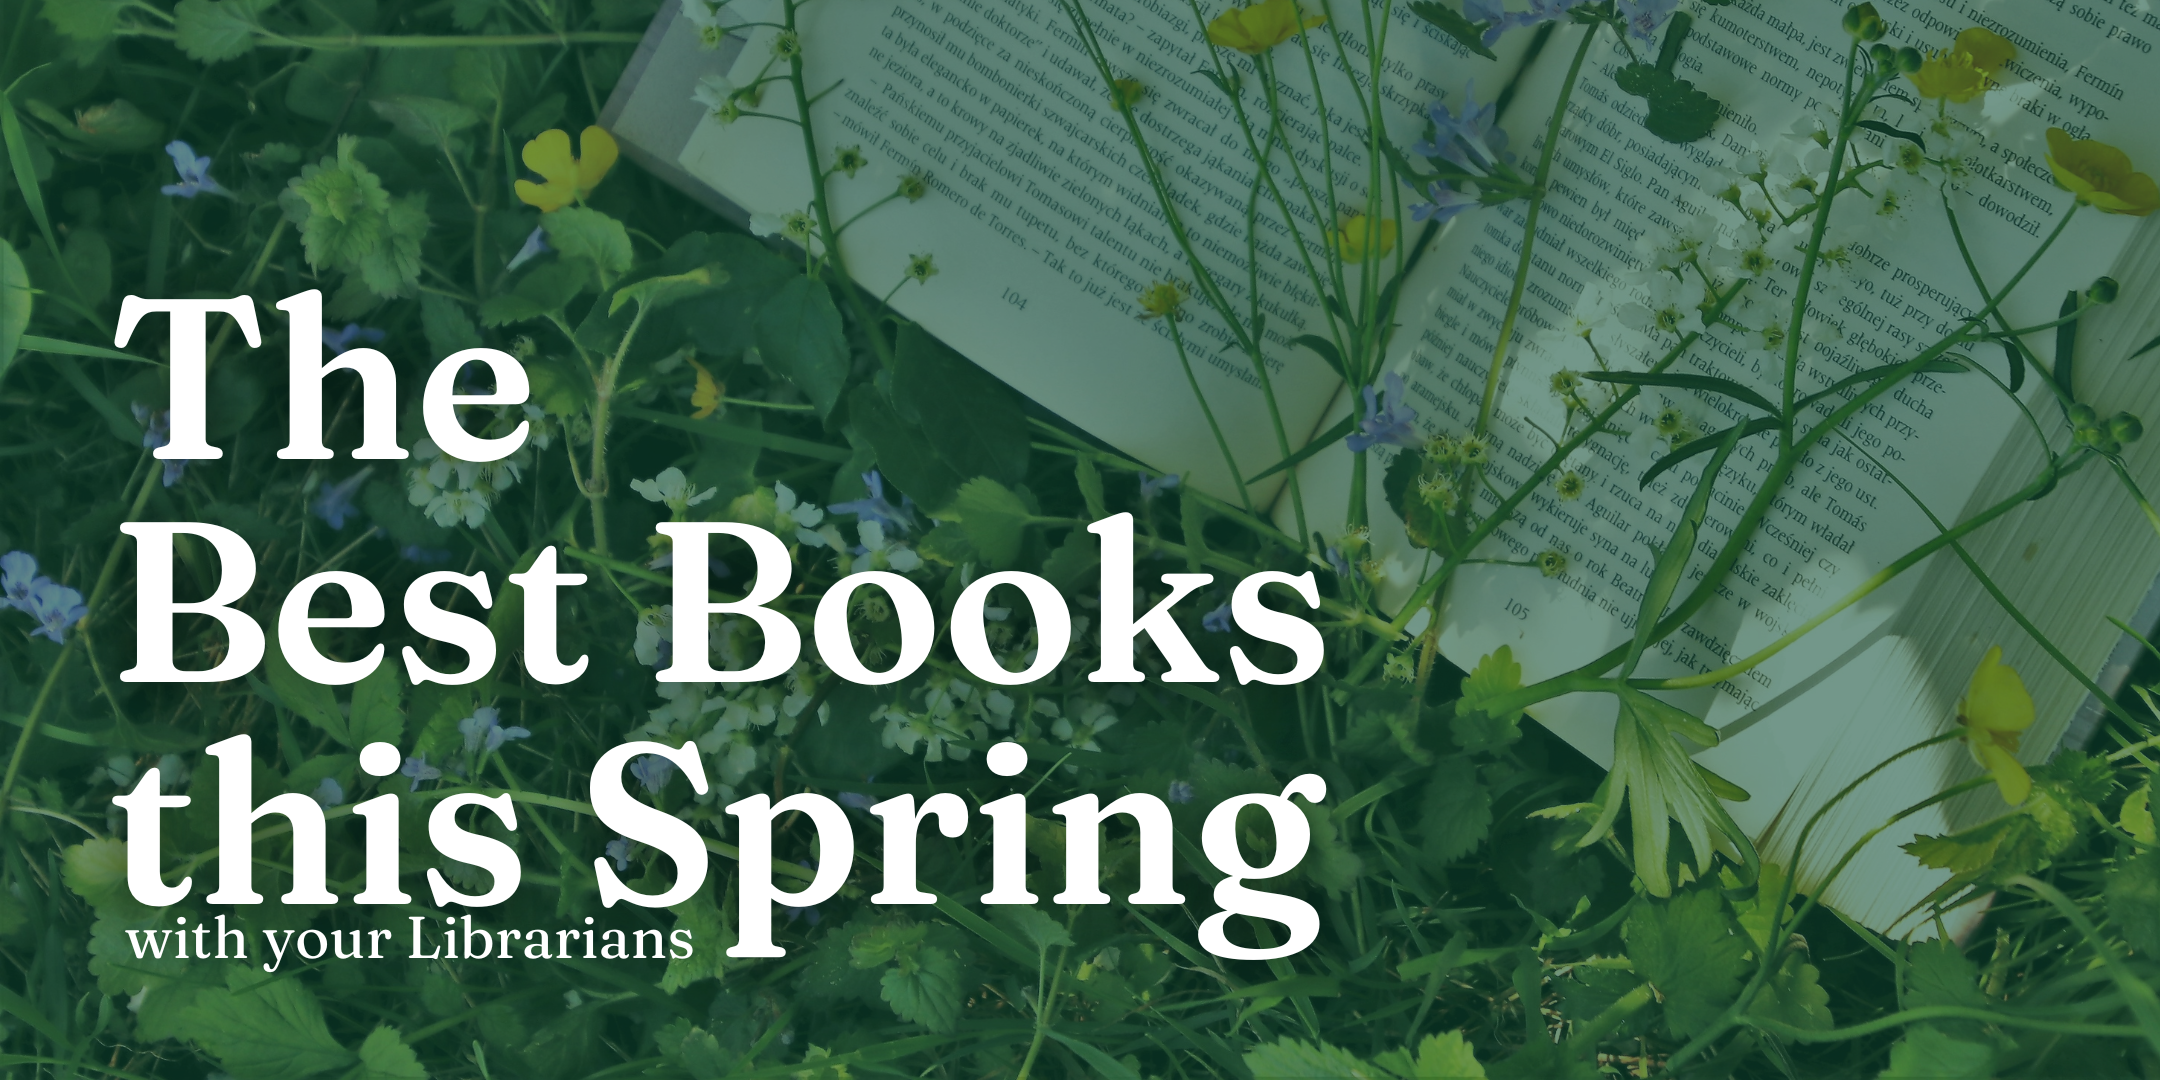 image of "The Best Books this Spring with your Librarians"